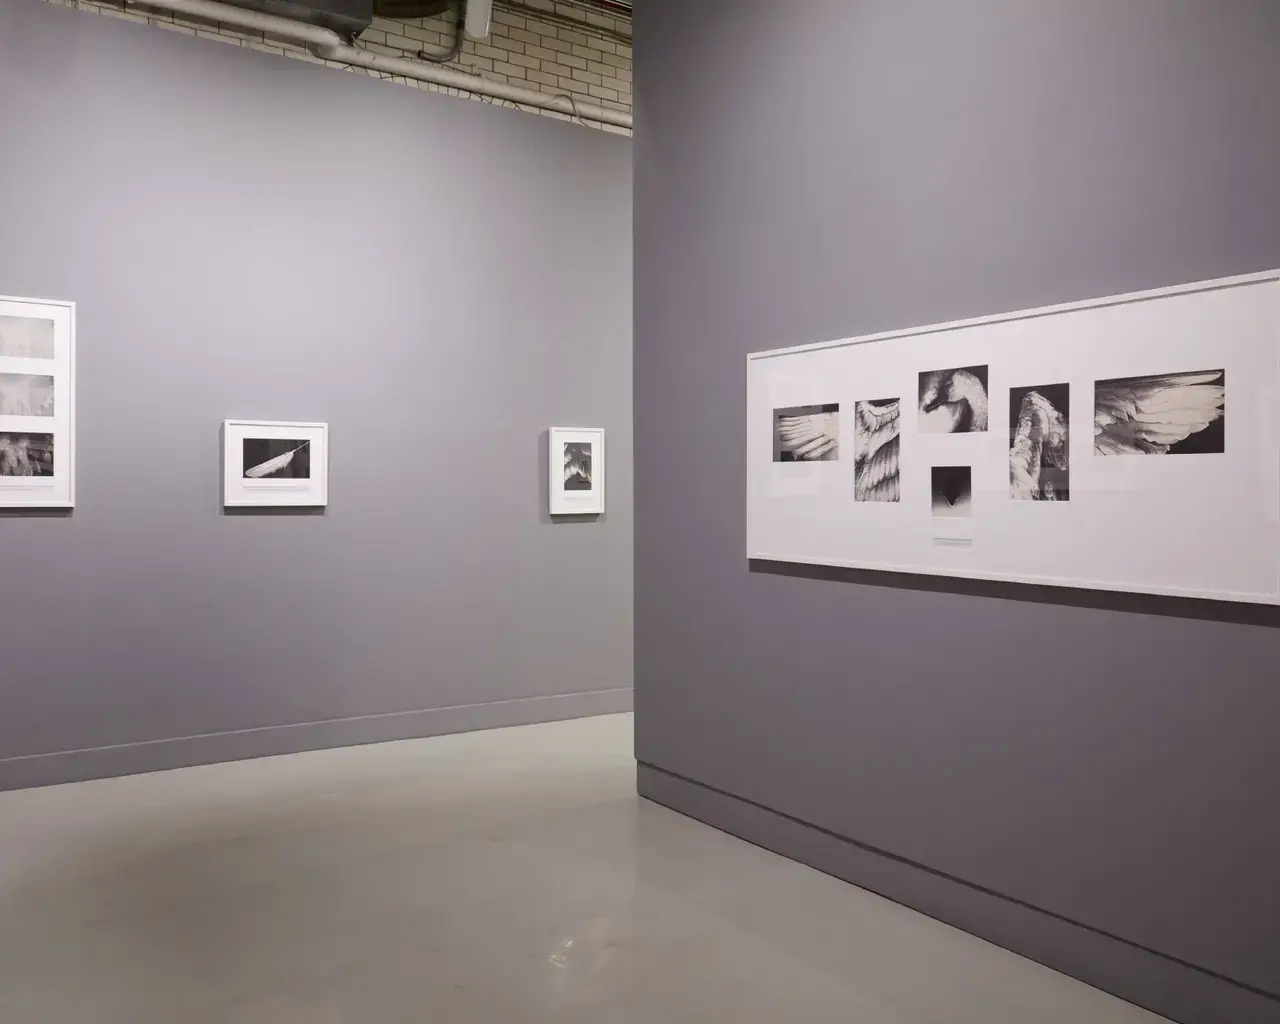 Installation view of Pati Hill: Photocopier, Arcadia University Art Gallery. A Swan: An Opera in Nine Chapters, 1978, 32 captioned black &amp; white copier prints, dimensions variable. Photo by Aaron Igler, Greenhouse Media, courtesy of the estate of Pati Hill.